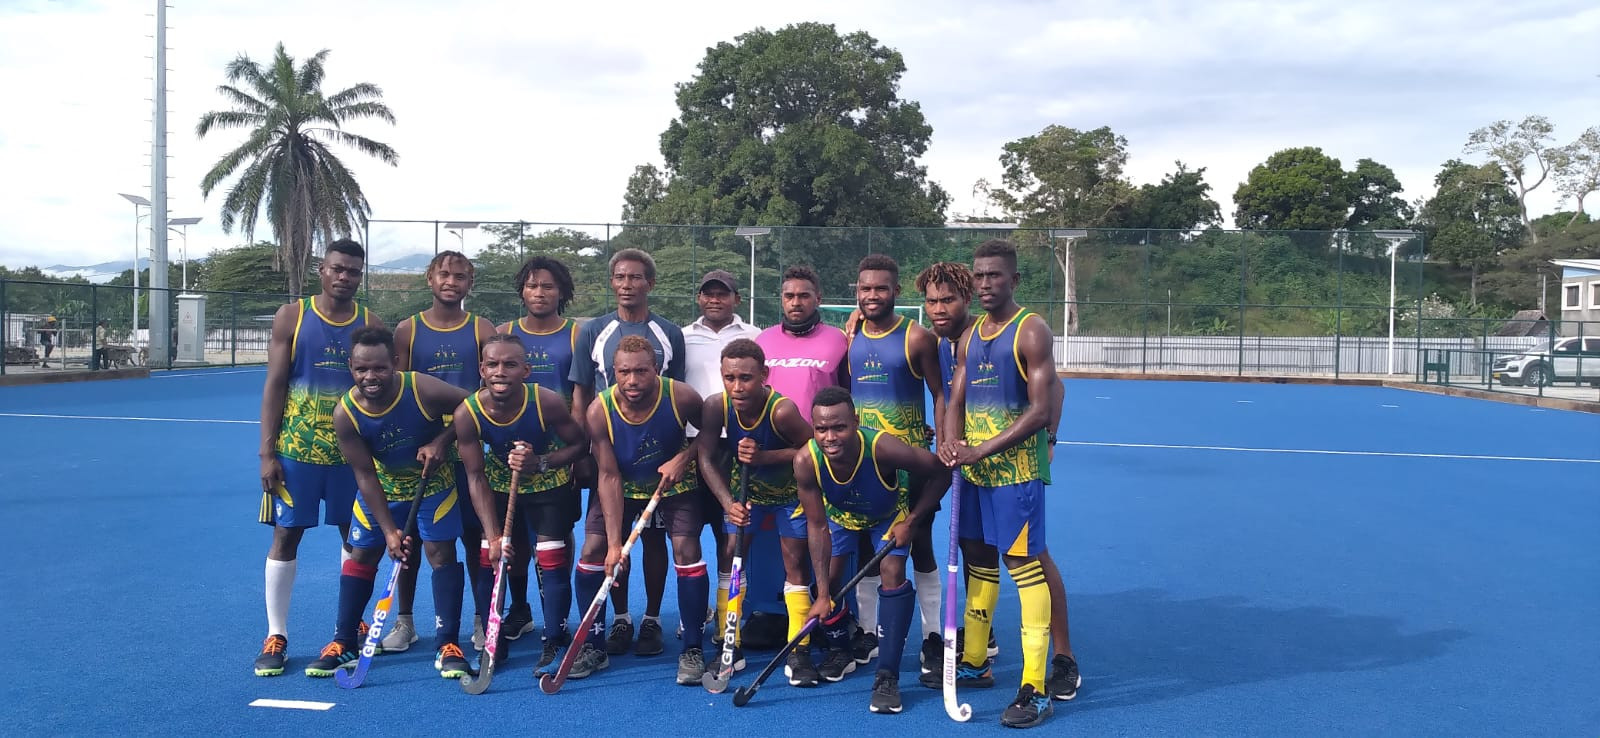 Solomon Islands 2023 is set to be the second edition of the Pacific Games where hockey5s has featured, after Port Moresby in 2015 ©OHF